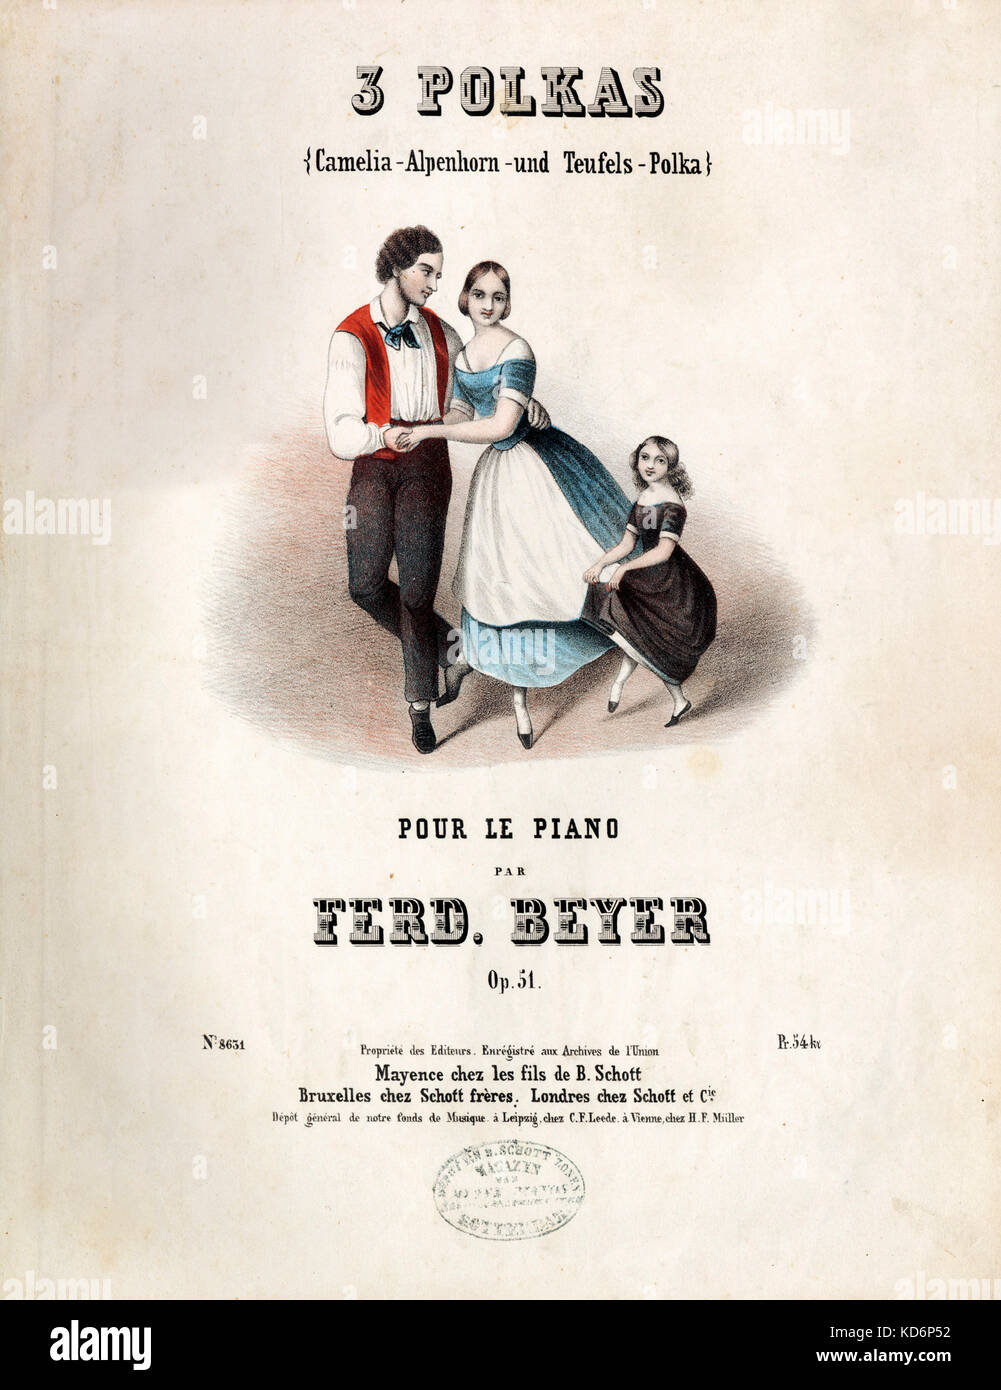 Polka - Score cover for '3 Polkas - Camelia, Alpenhorn und Teufels, Polka. For piano by F. Beyer Opus 51. Illustrations shows dance steps. Mother, father, daughter all dancing. Published Mainz, B Schott, 1850-56 Stock Photo